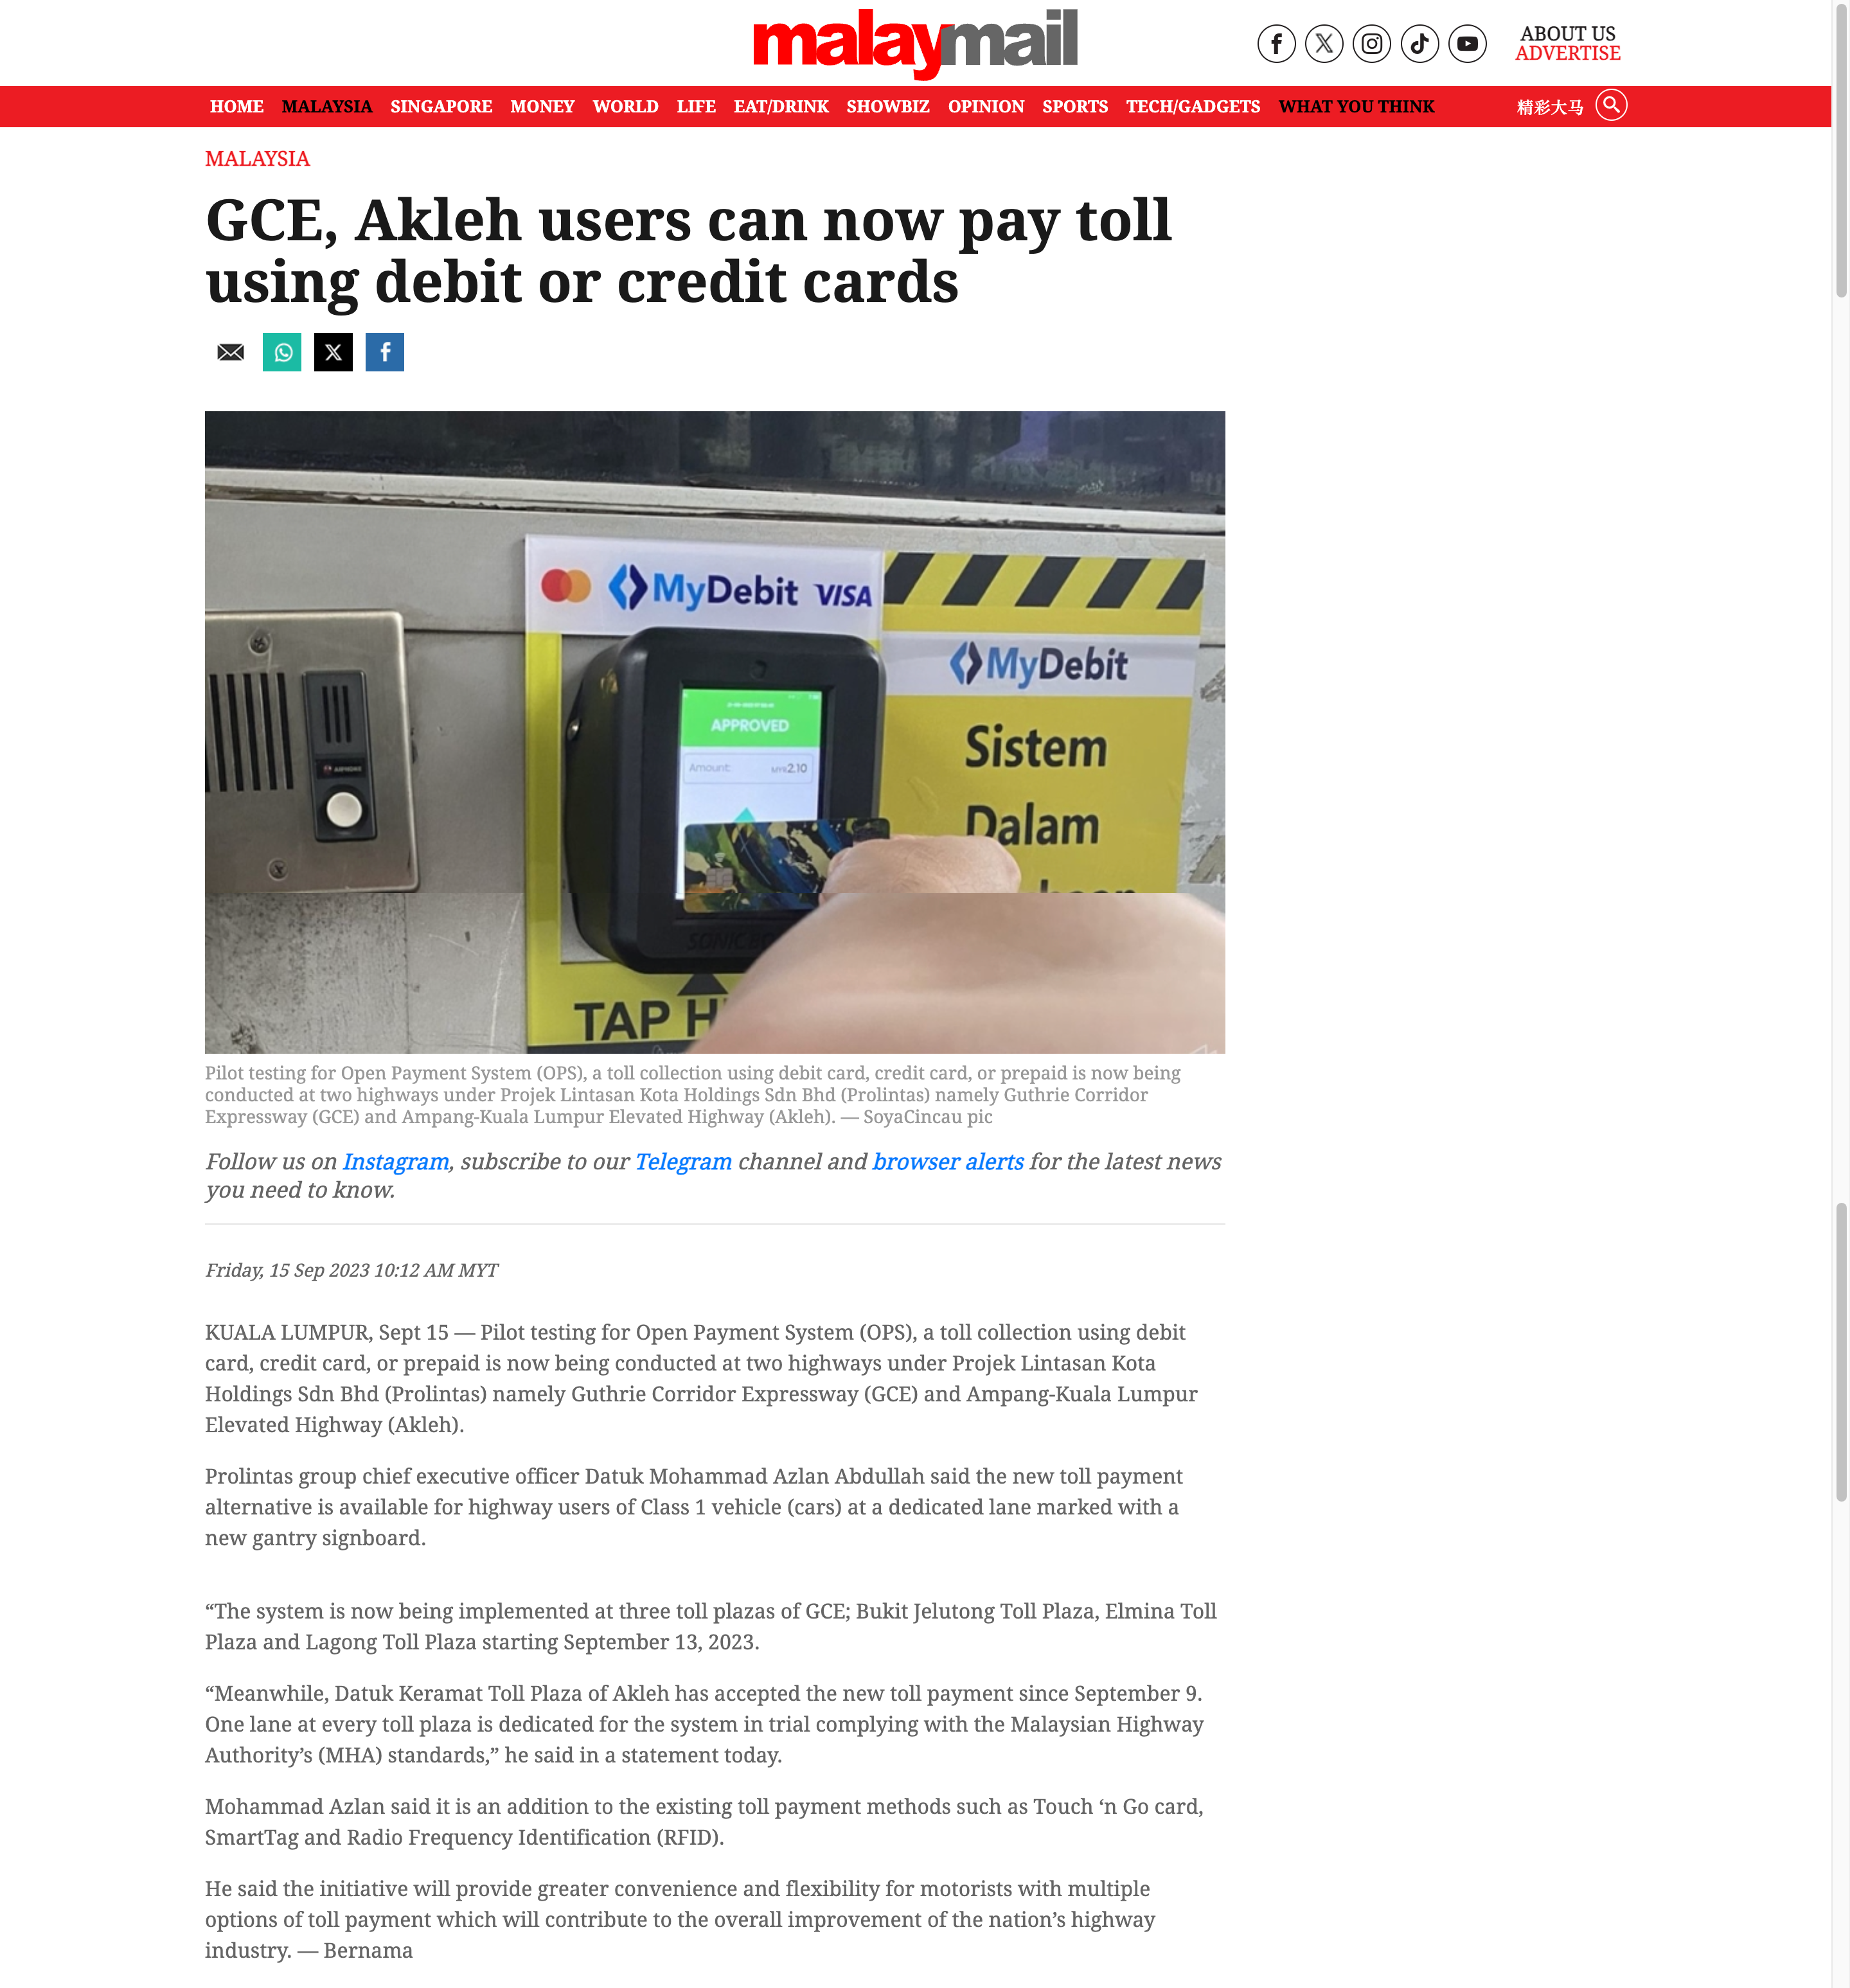 MALAY MAIL | GCE, AKLEH USERS CAN NOW PAY TOLL USING DEBIT OR CREDIT CARDS